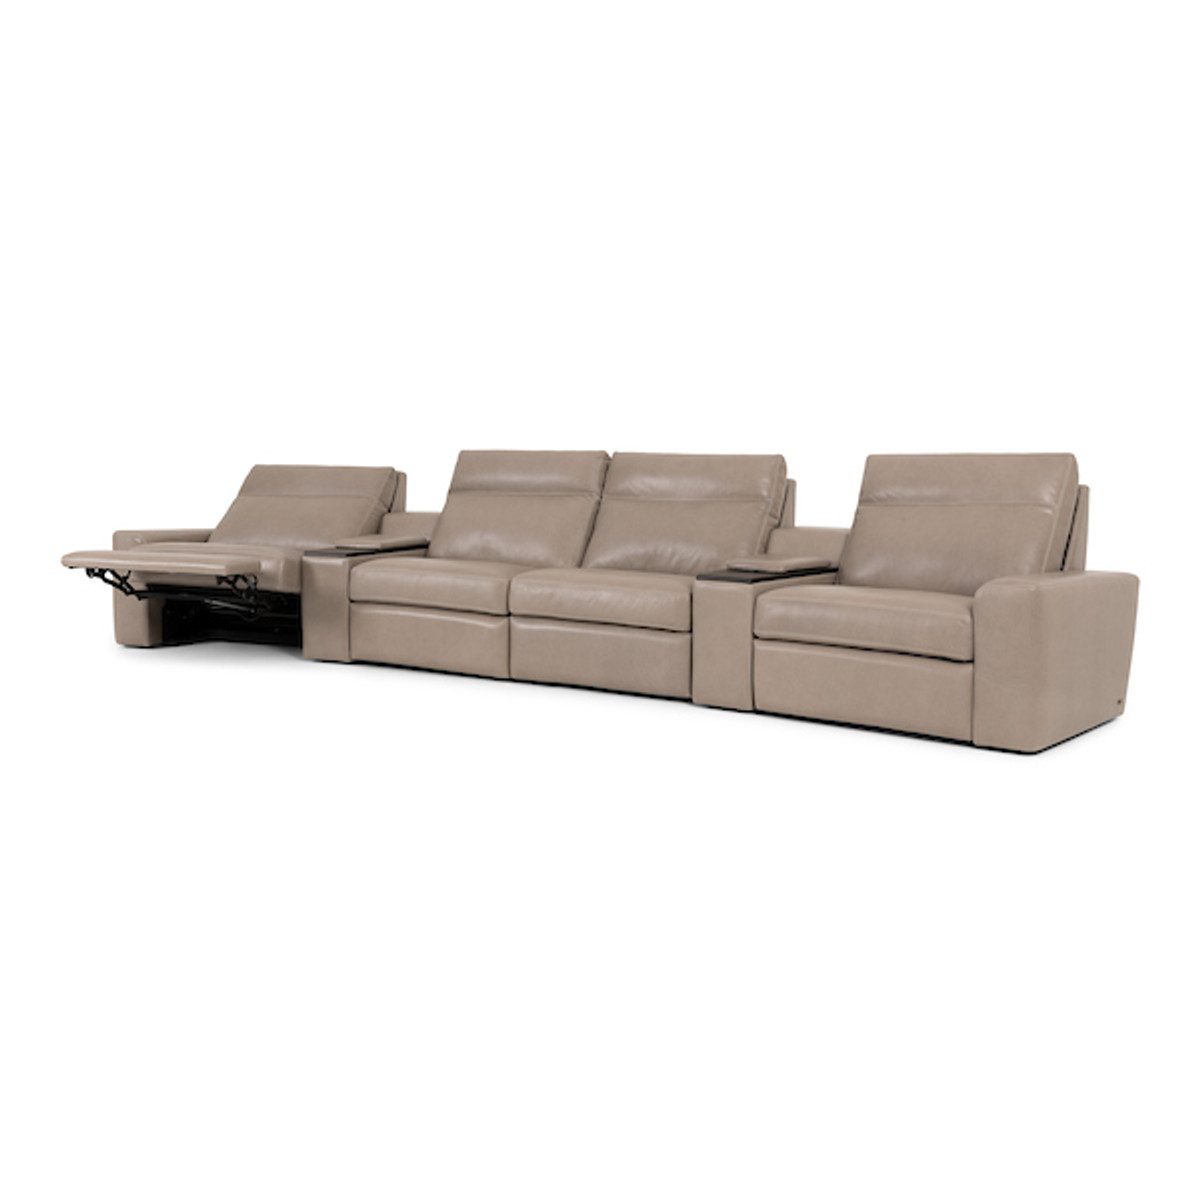 Telluride Motion Sofa and Sectional | American Leather